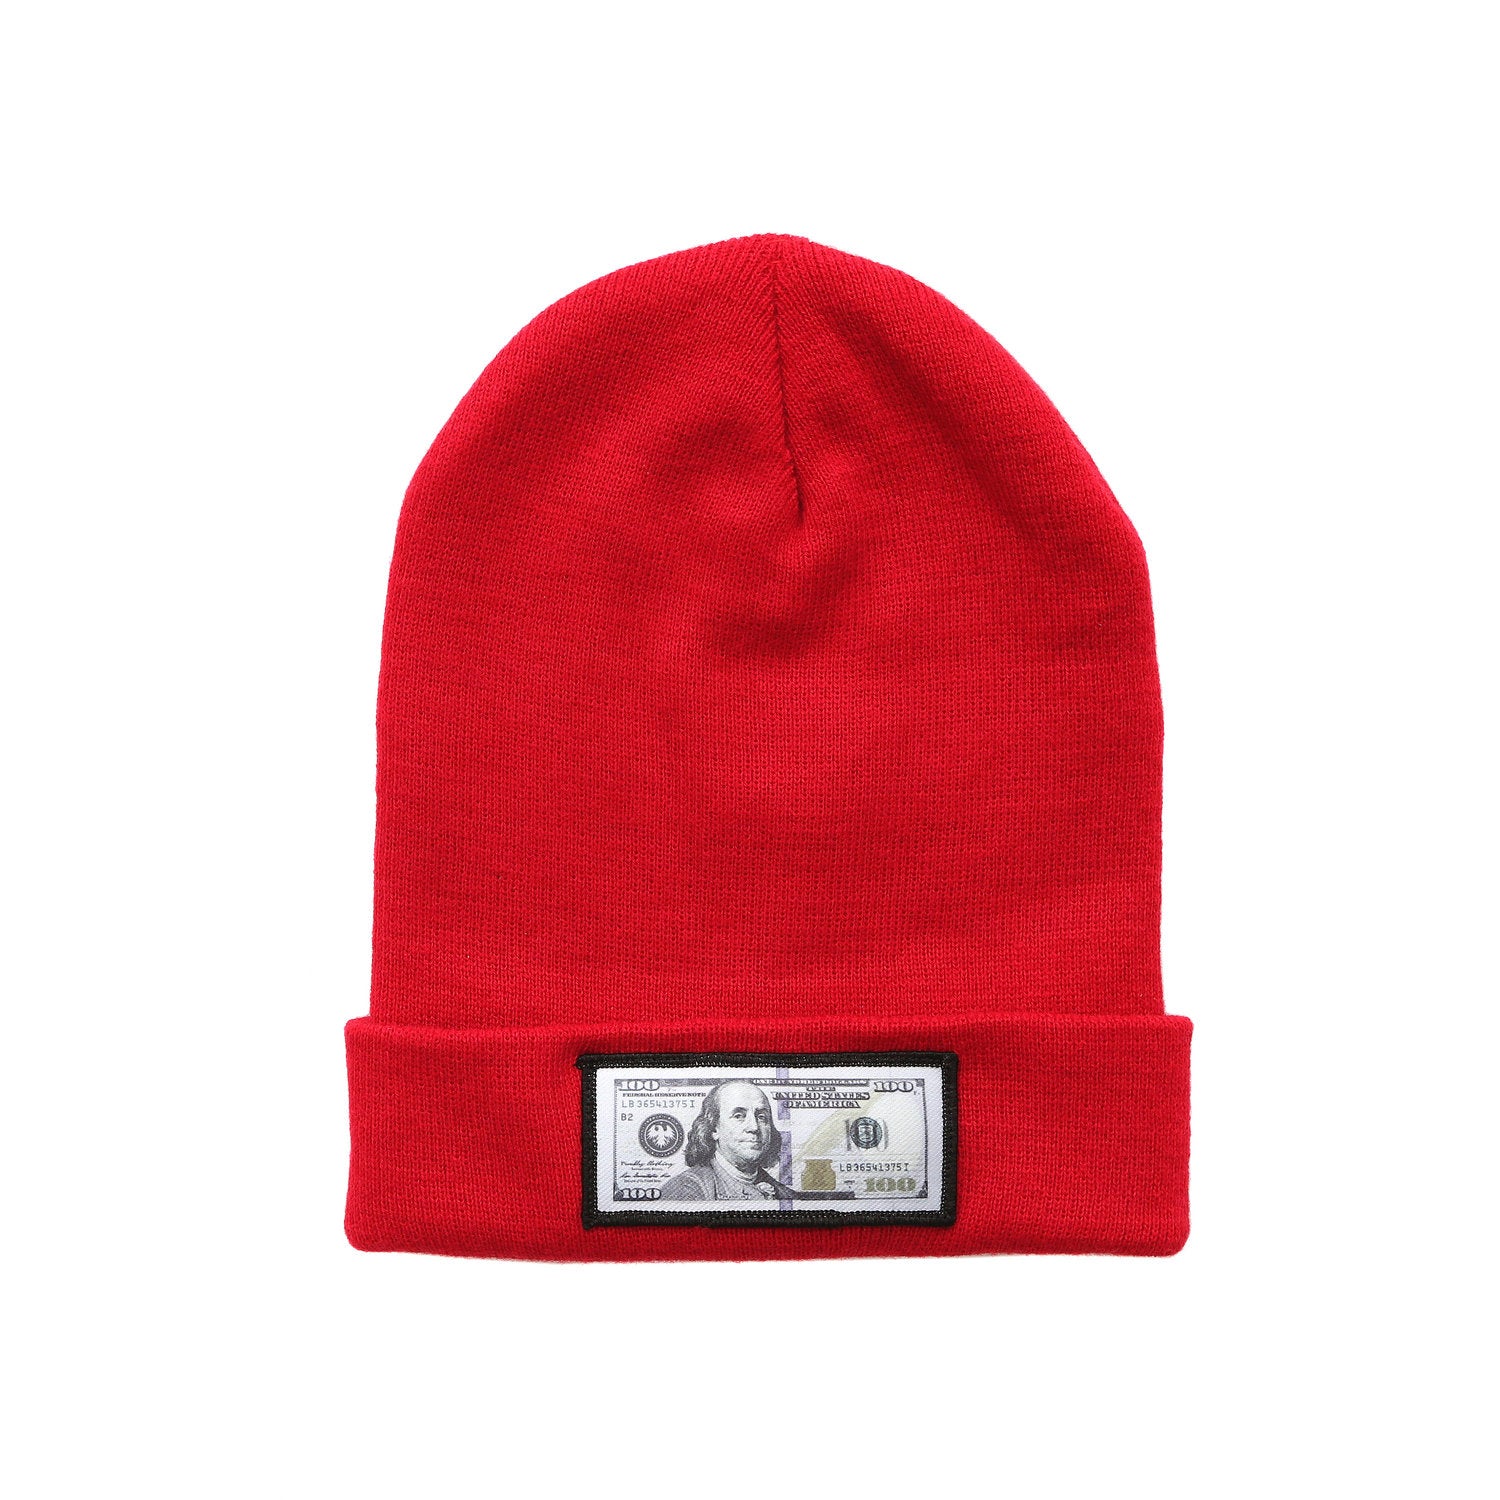 blue hundreds Red comfy beanie with $100 logo on front